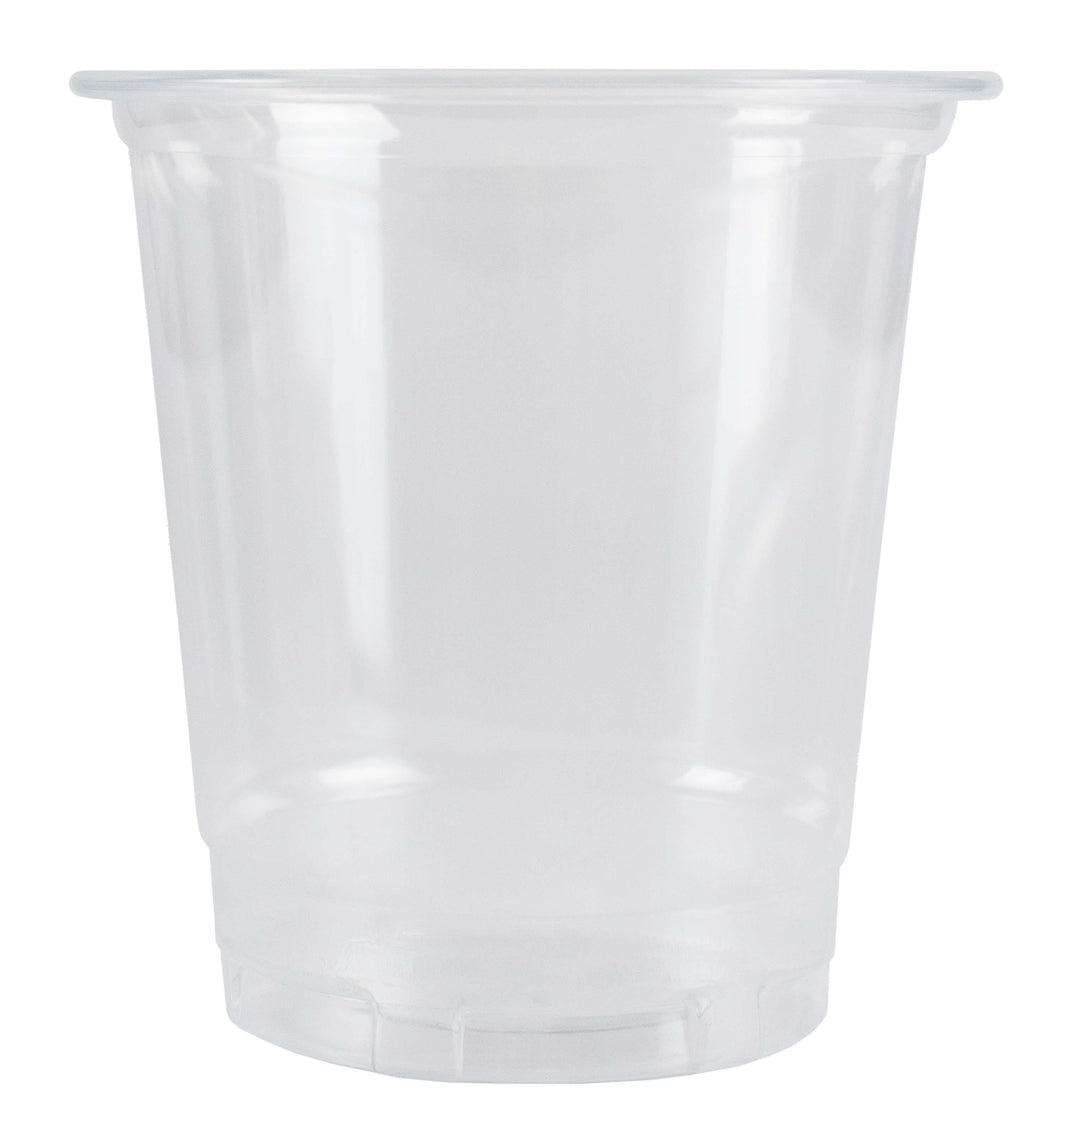 UNIQIFY® 12/14 oz Clear Drink Cup - Hot Cup Factory 34614